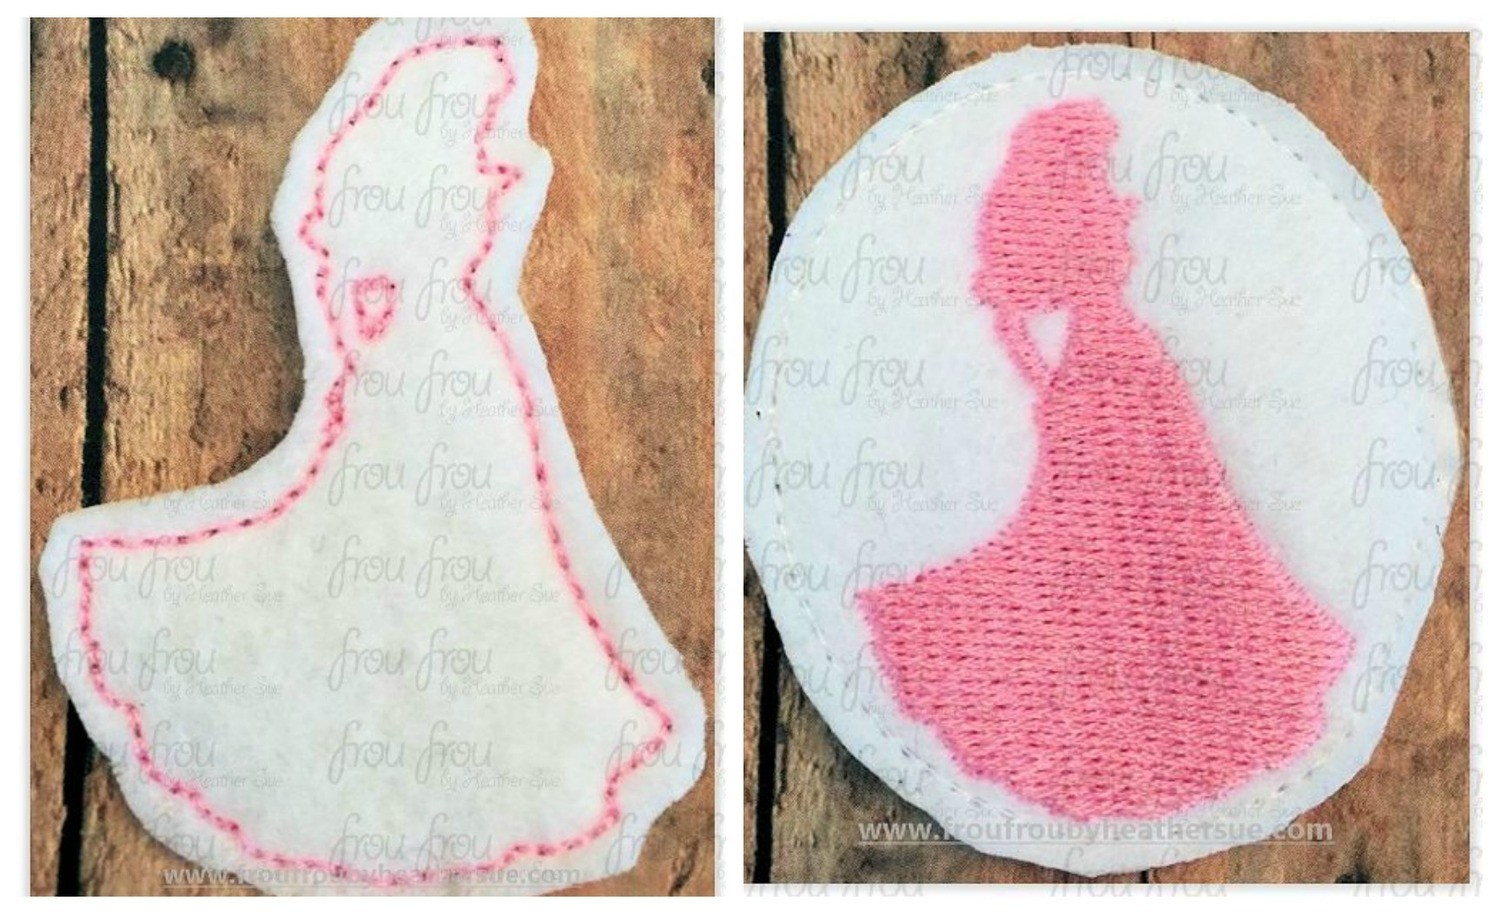 Clippie Sleeping Pretty Princess Full Body Silhouette TWO Versions In the Hoop Machine Embroidery Design, Multiple sizes 1.5